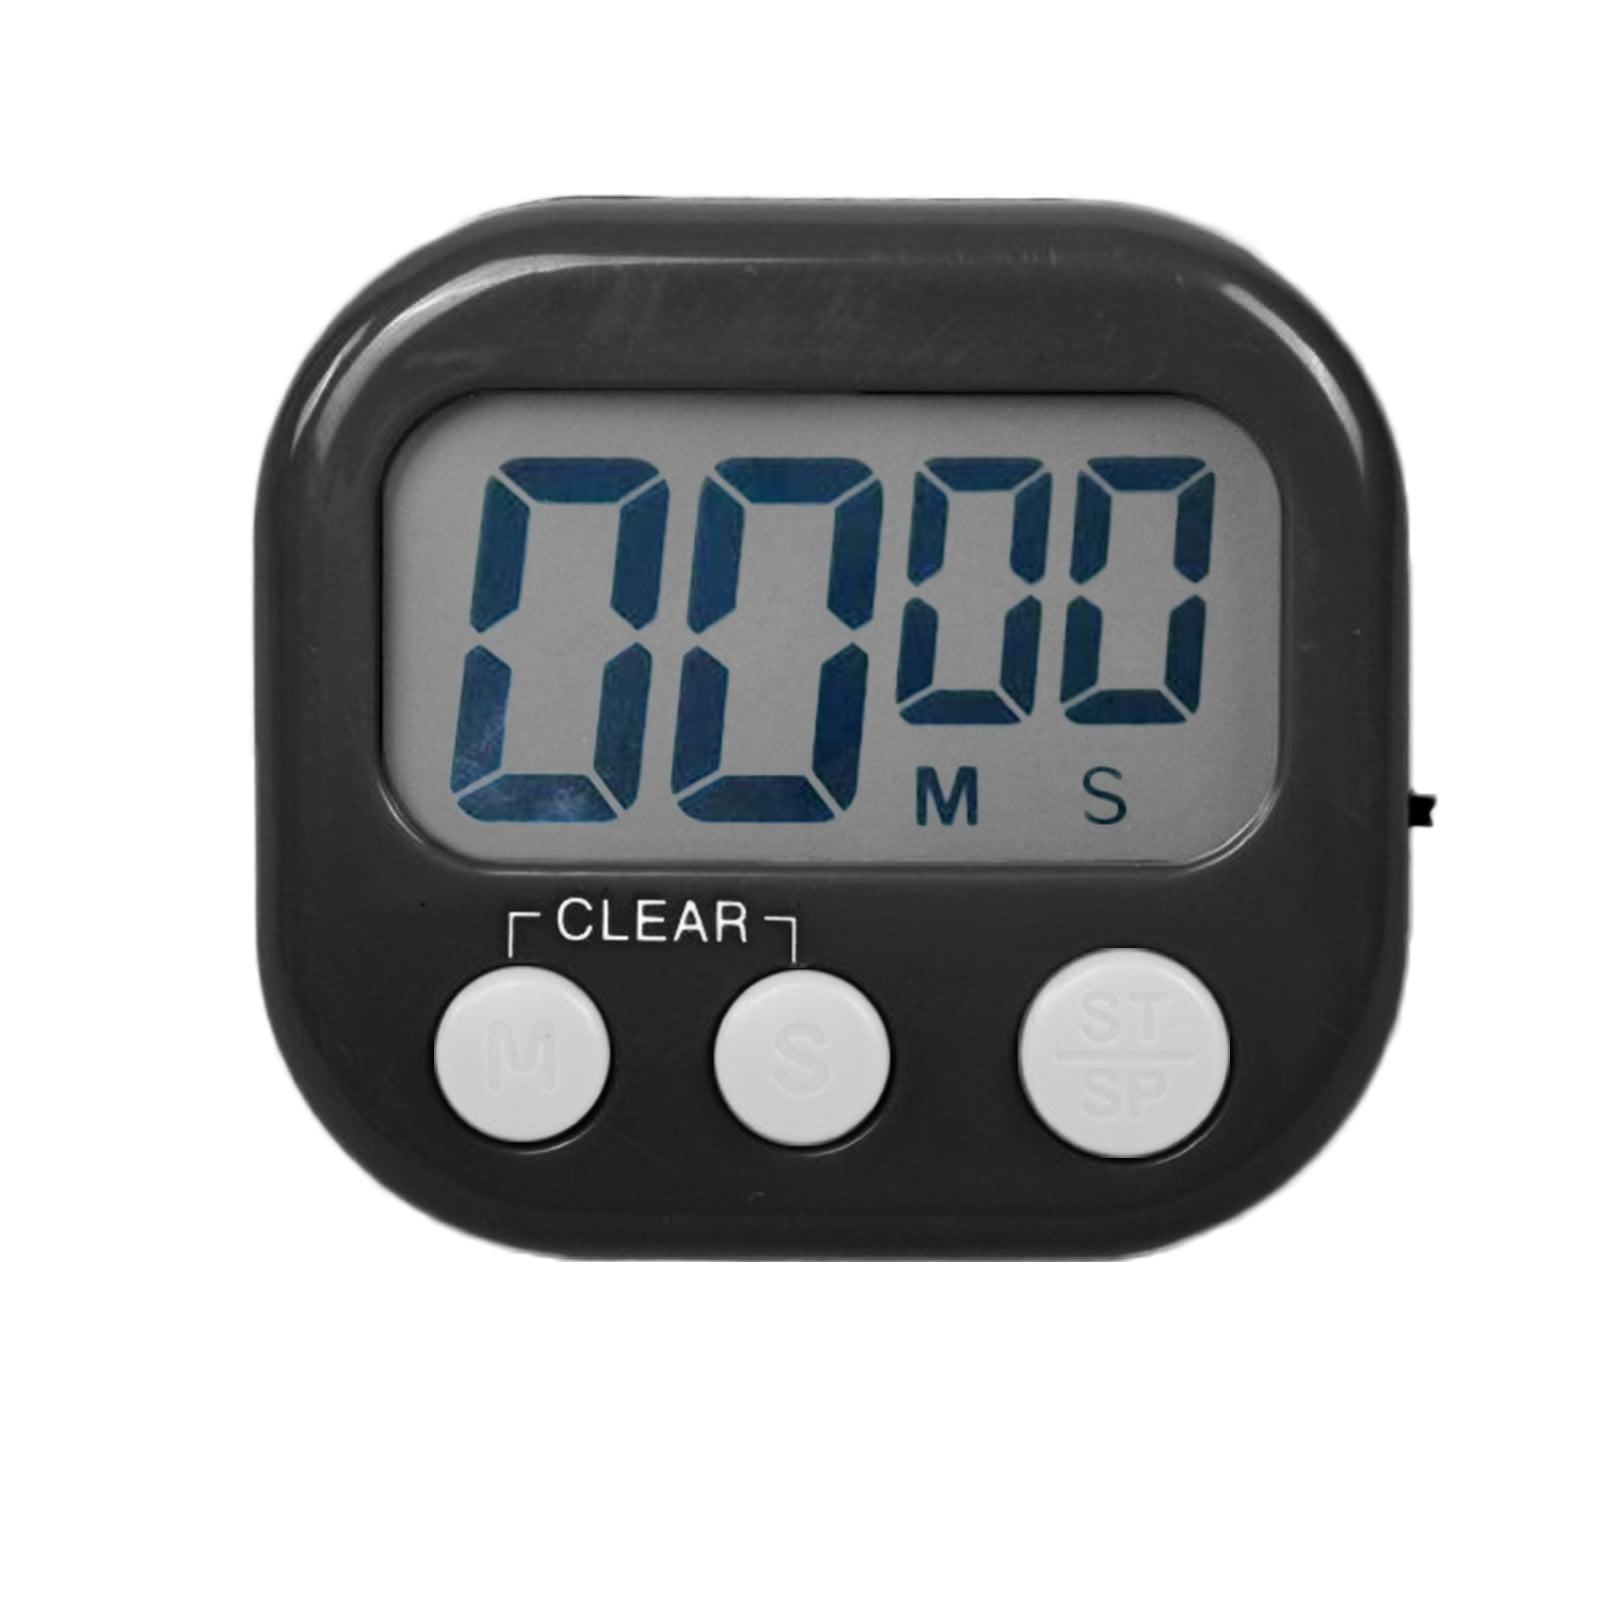 Peartso Digital Kitchen Timer, Classroom Timers for Teachers Kids, Count Up  Countdown 